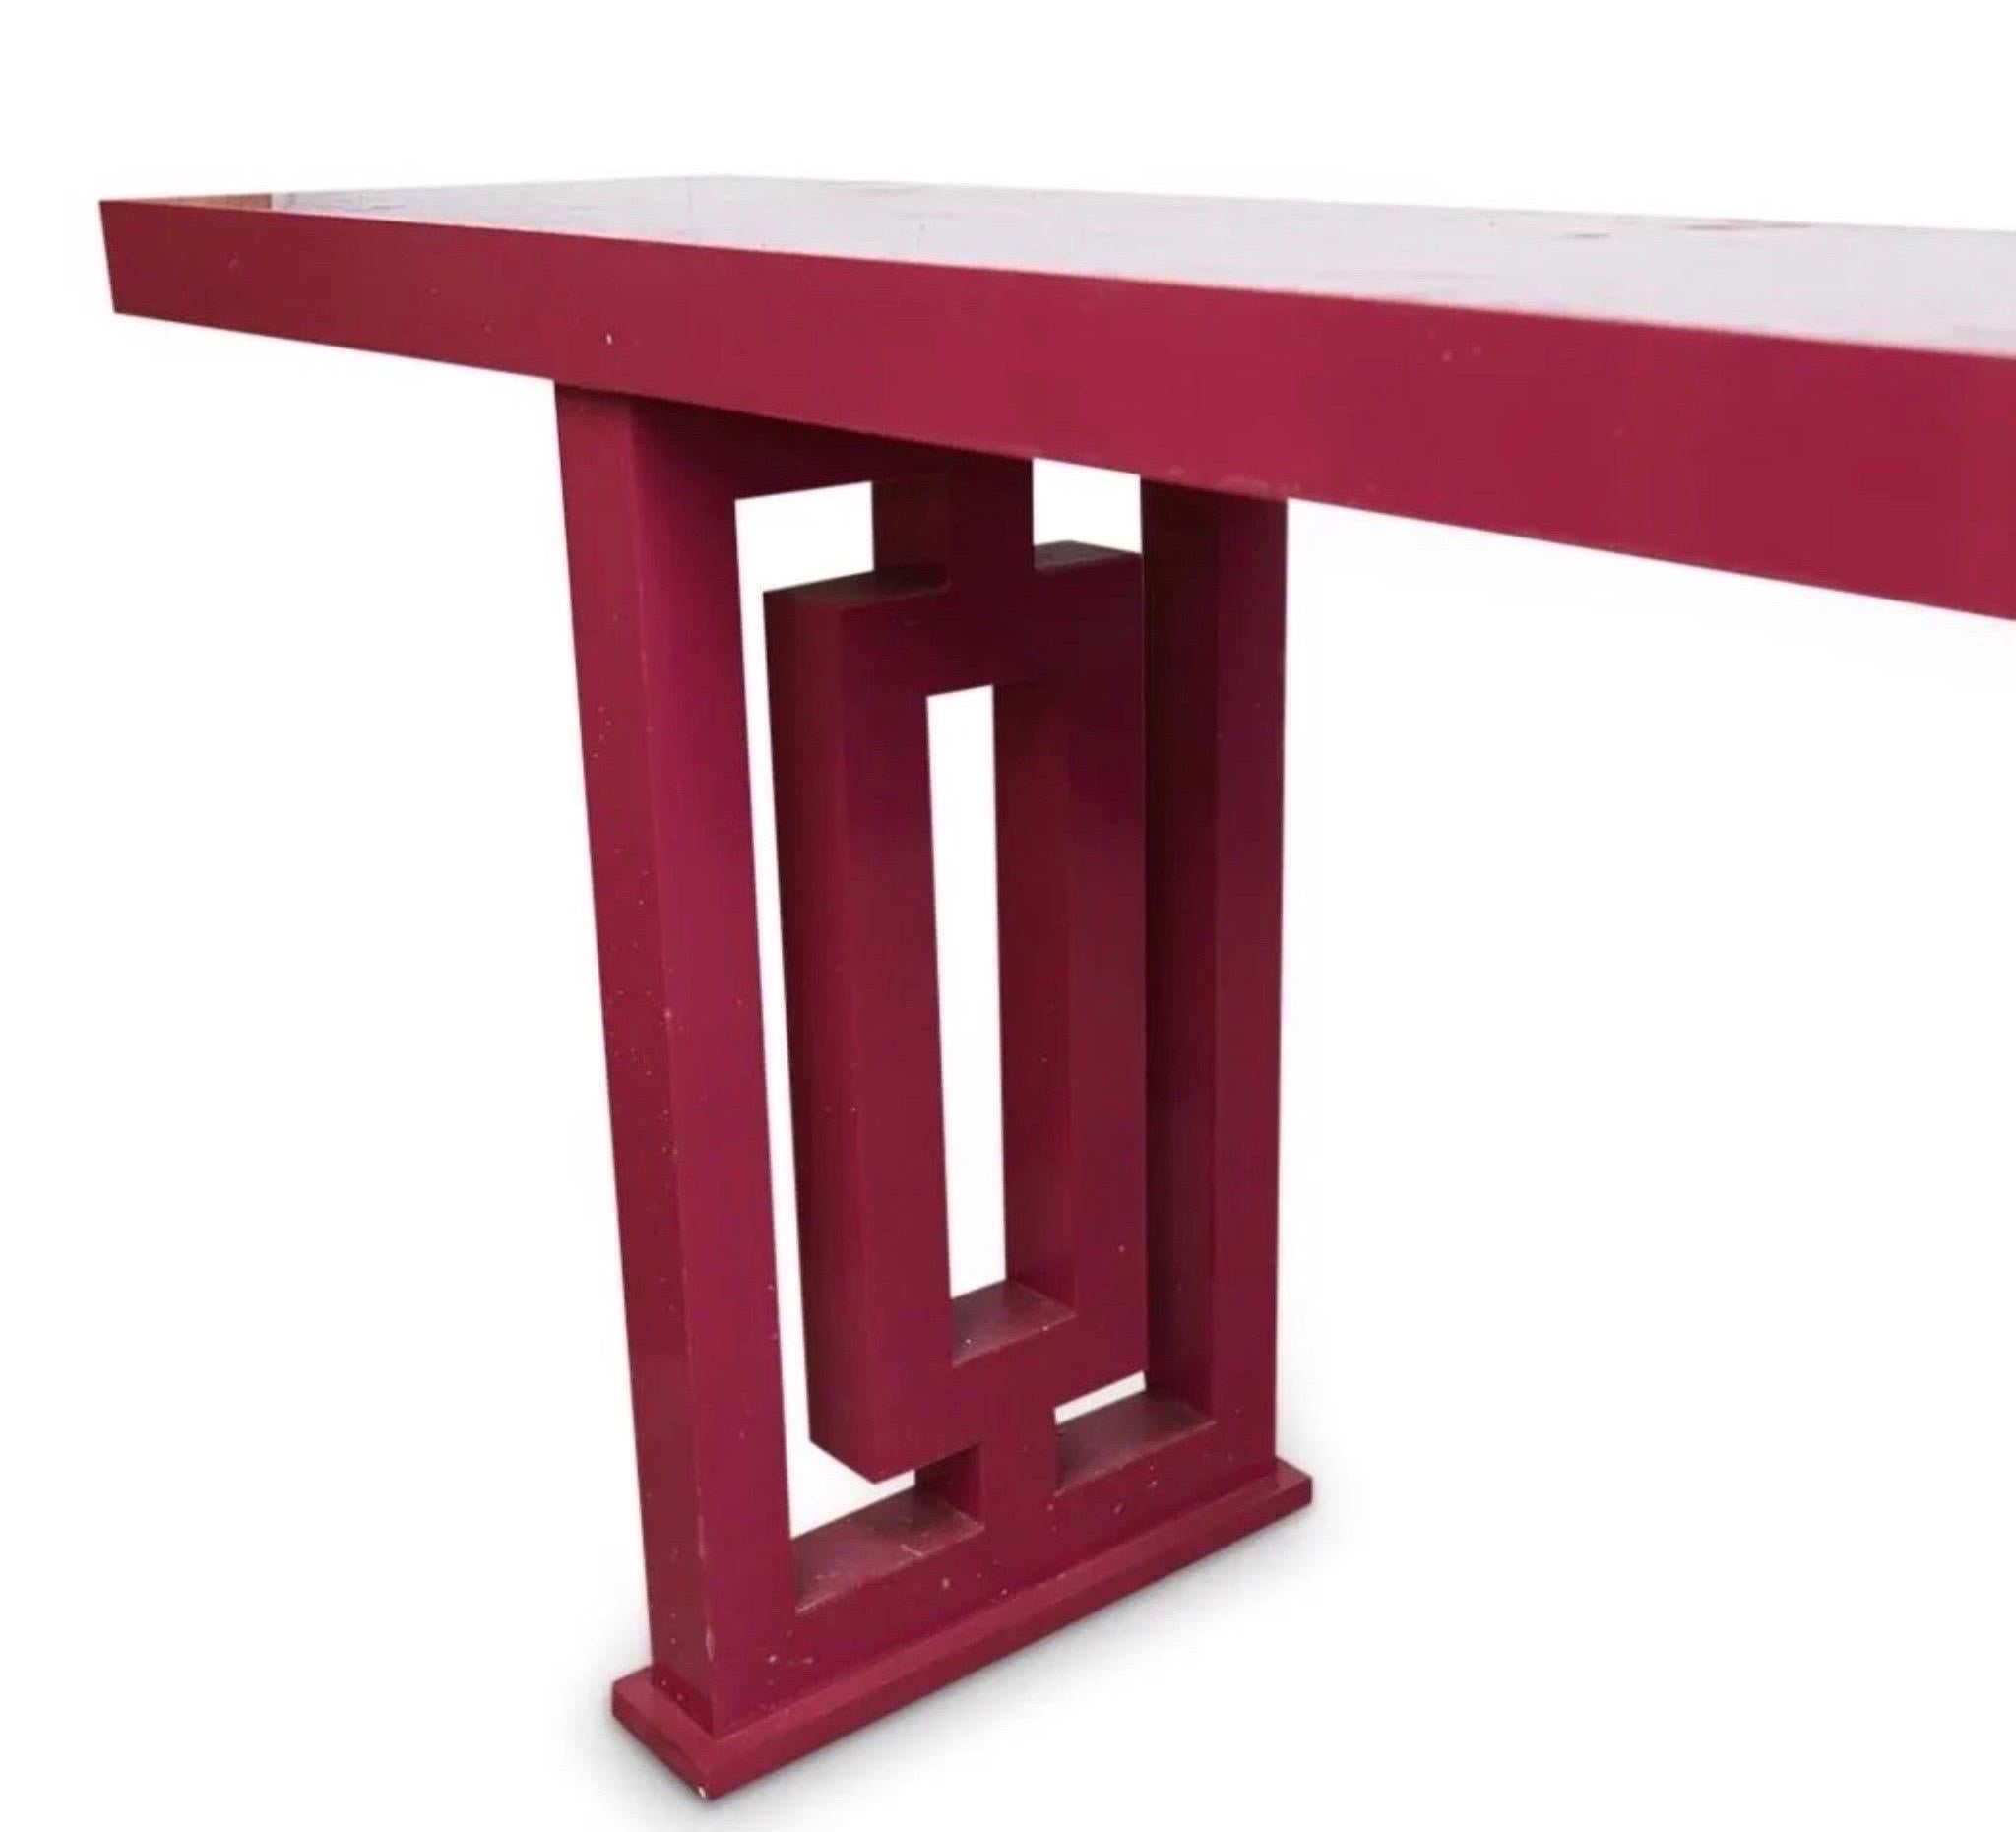 Monumental, Hollywood Regency altar table with pink lacquered wood design, constructed with a minimalist rectangular table top, raised on two pierced bases.